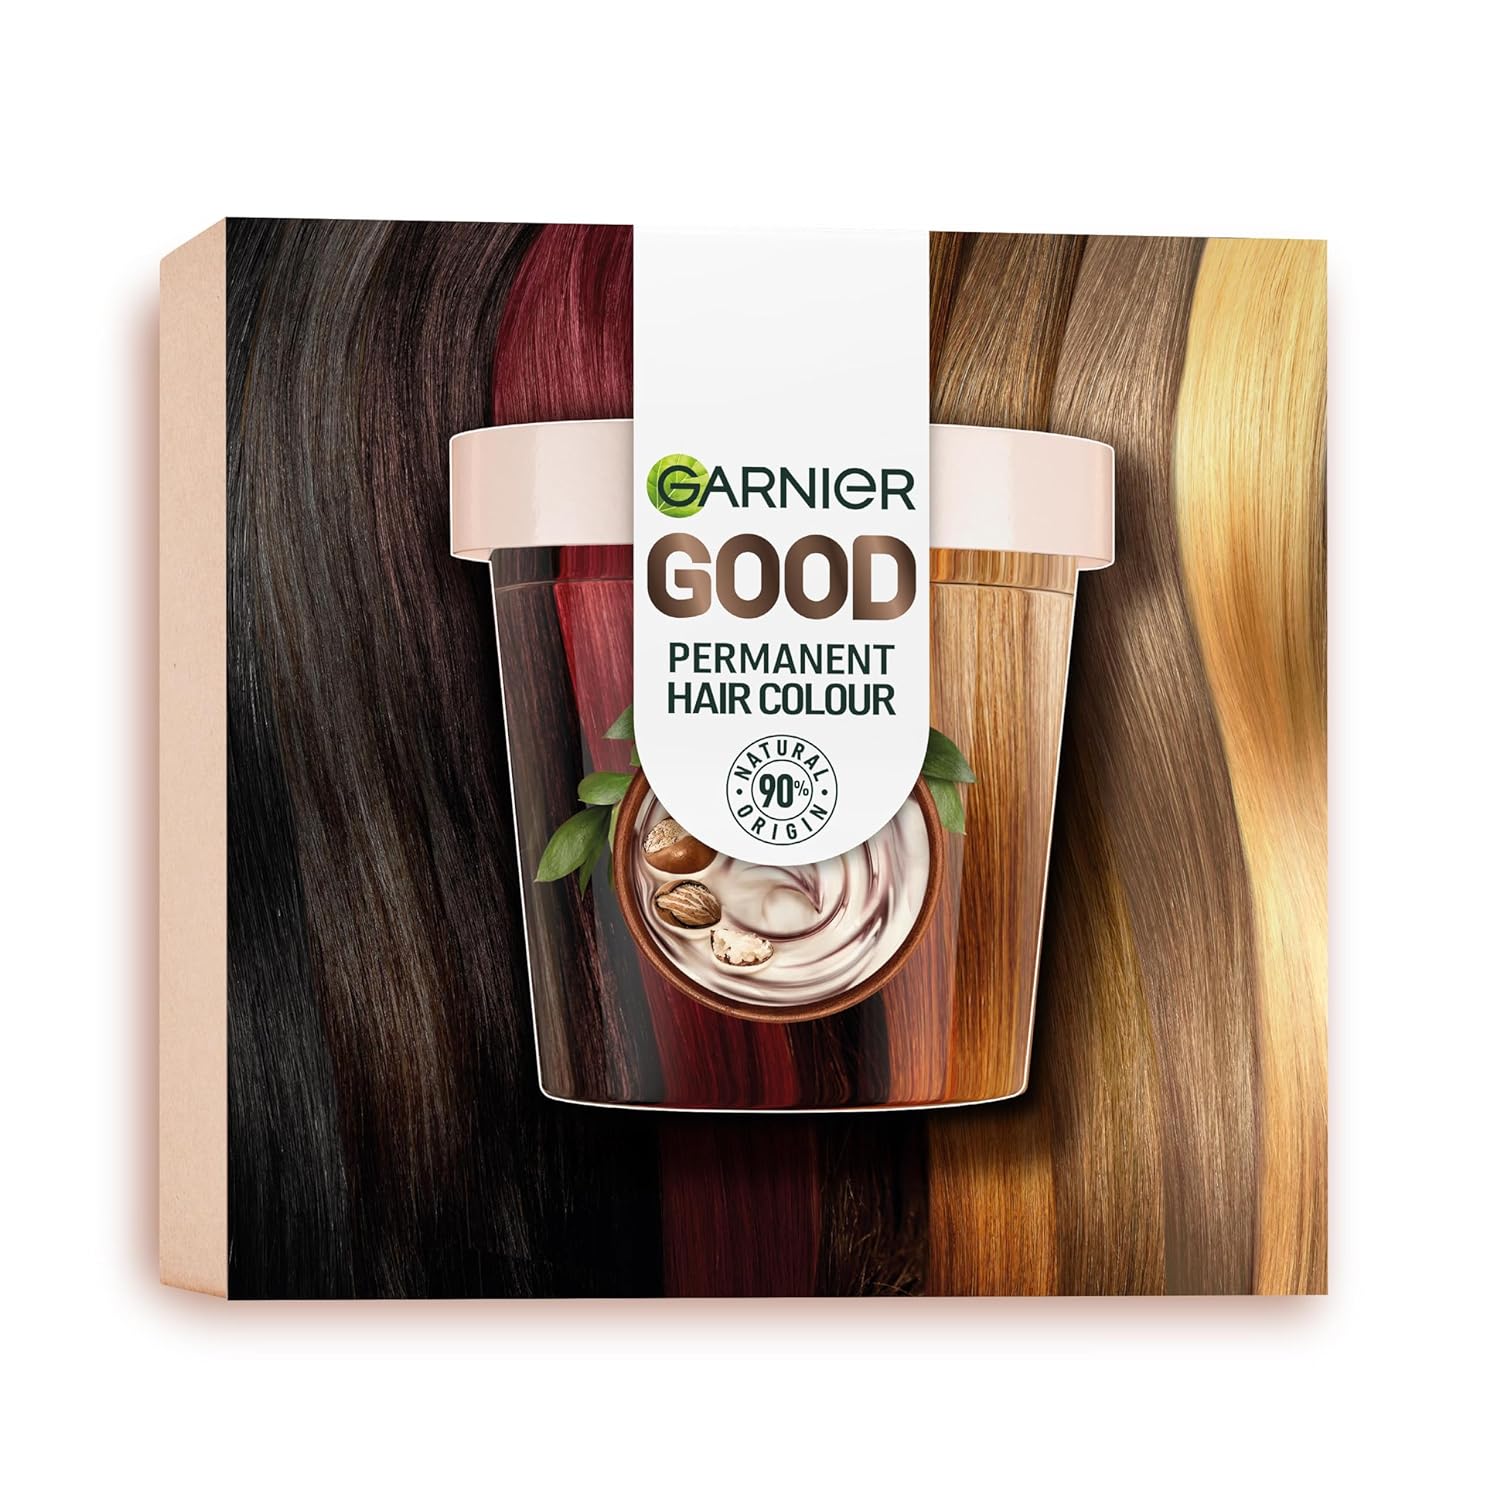 Garnier Good Starter Set Permanent Hair Color, Hair Dye Set for Intense and Long-Lasting, Colouration for Up to 8 Weeks of Radiant Color, No Ammonia, 7.12 Latte Macchiato Brown